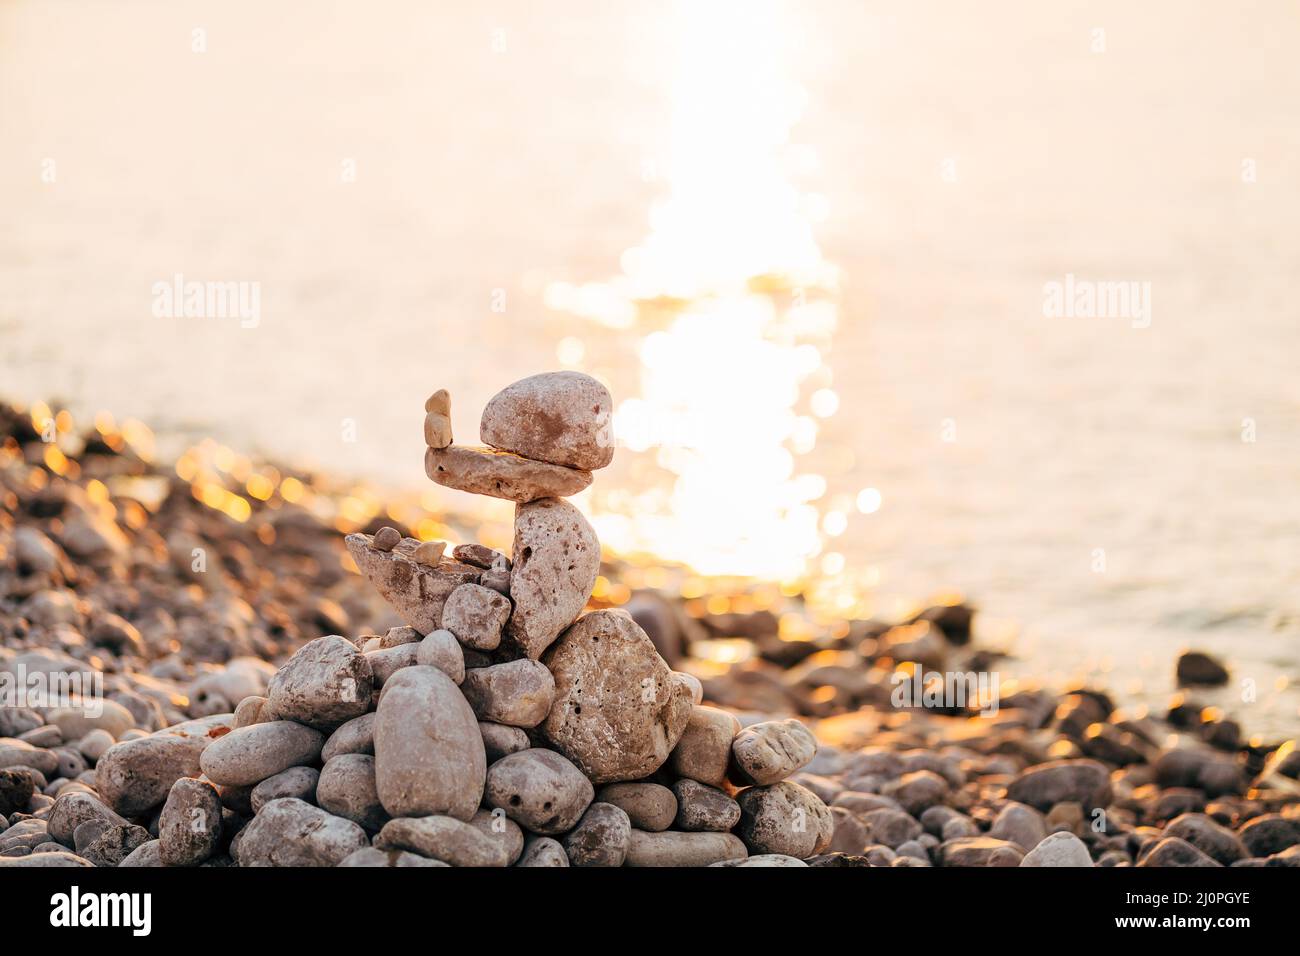 Stones stacked on top of each other by the sea Stock Photo